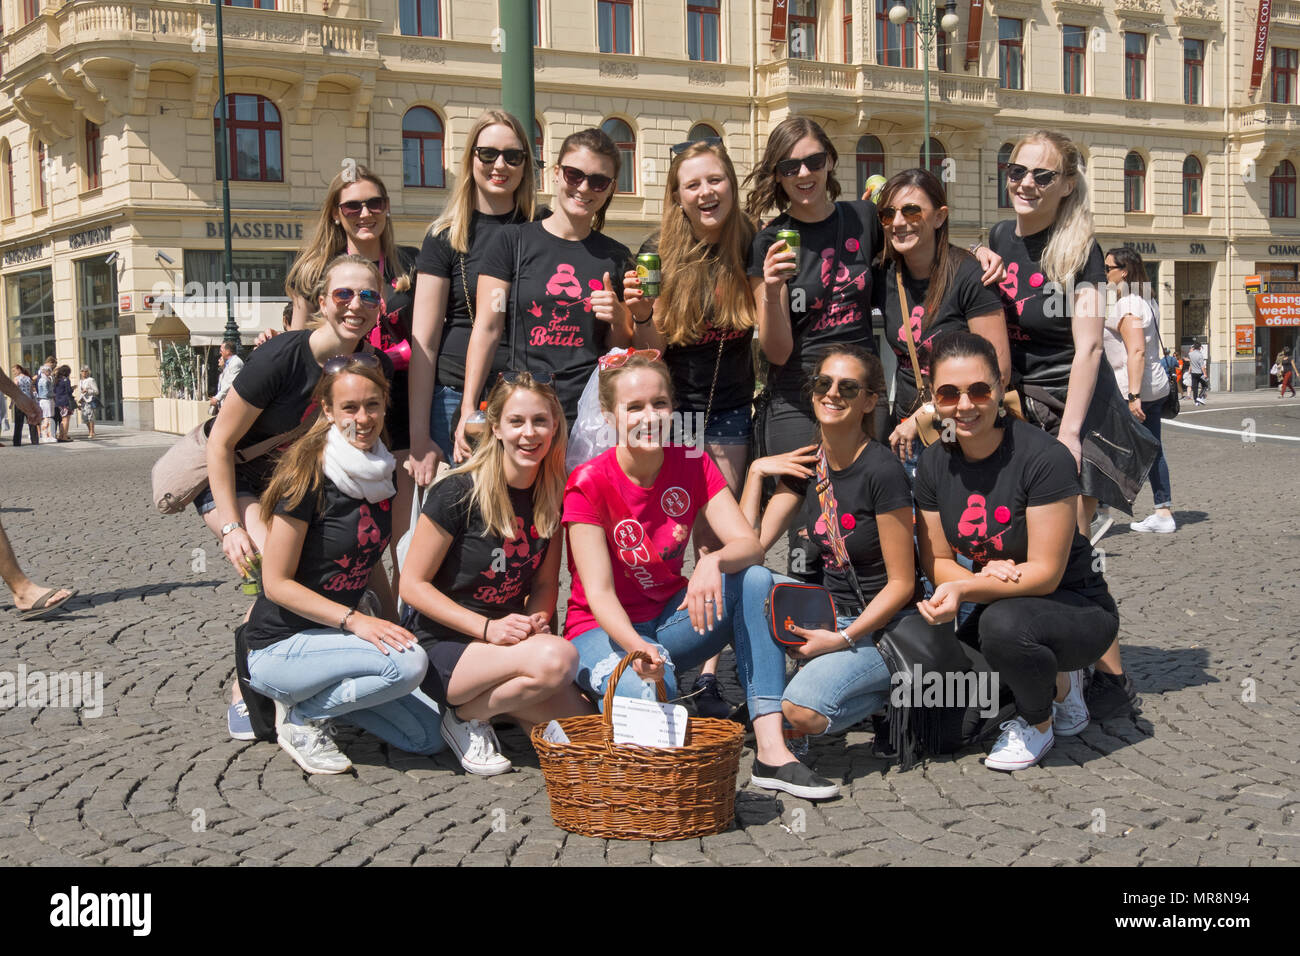 A bride to be from Salzburg, Austria poses with her bridesmaid friends & family at Republic Square in Prague, Czech Republic. Stock Photo